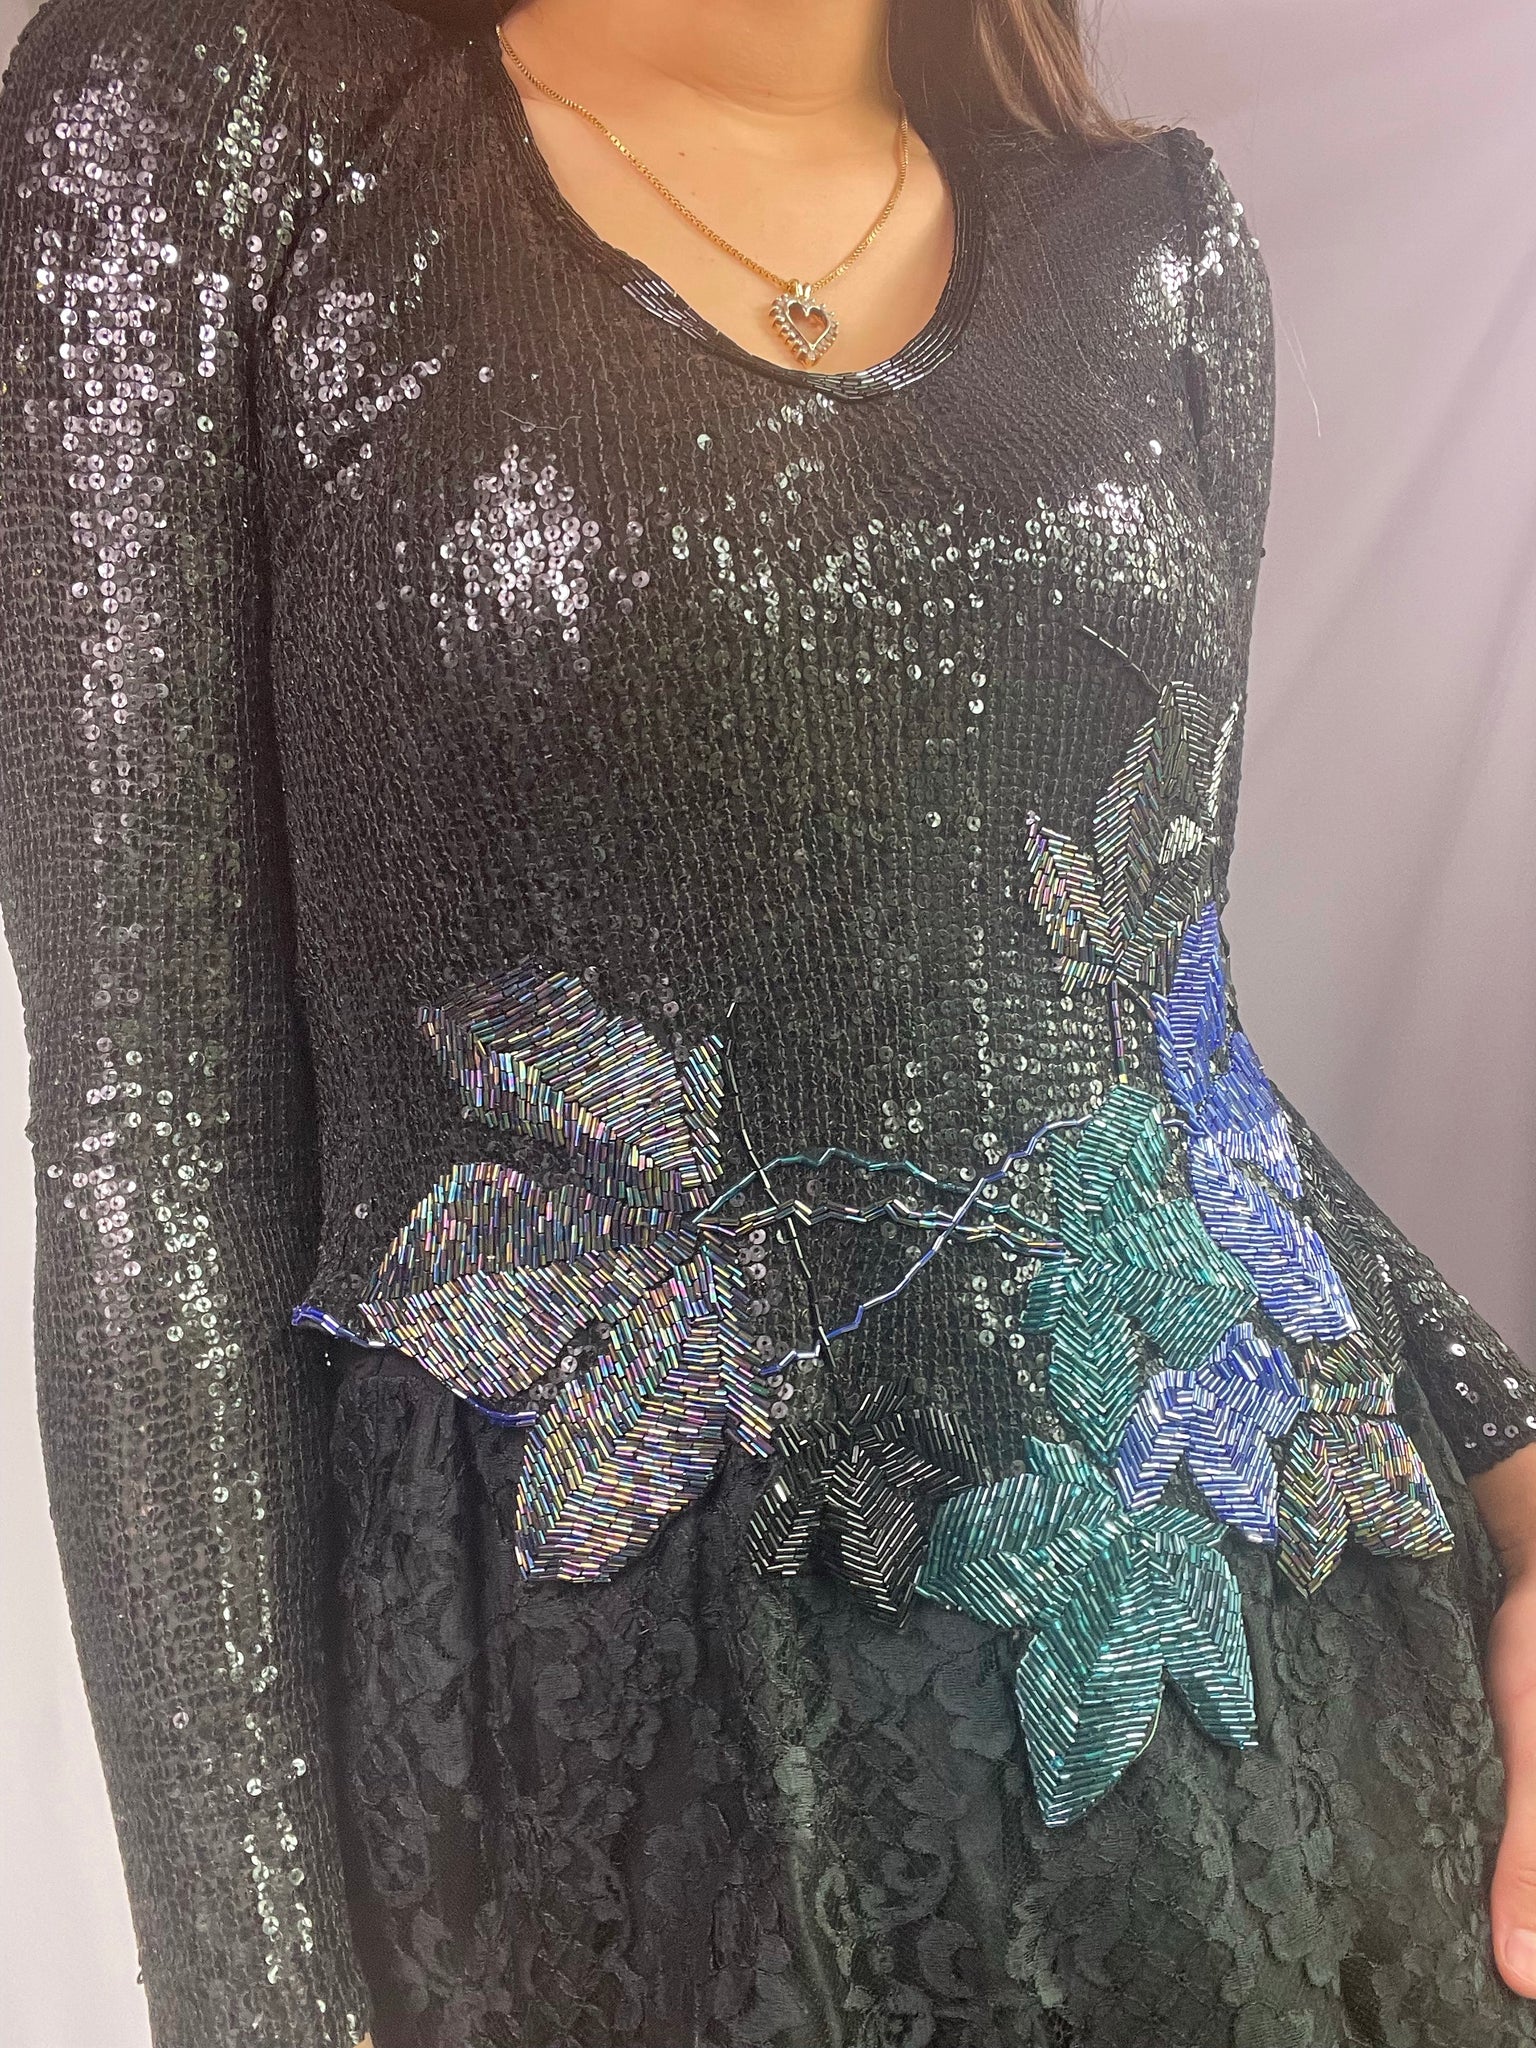 Vintage 80s homemade sequined dress, Size XS